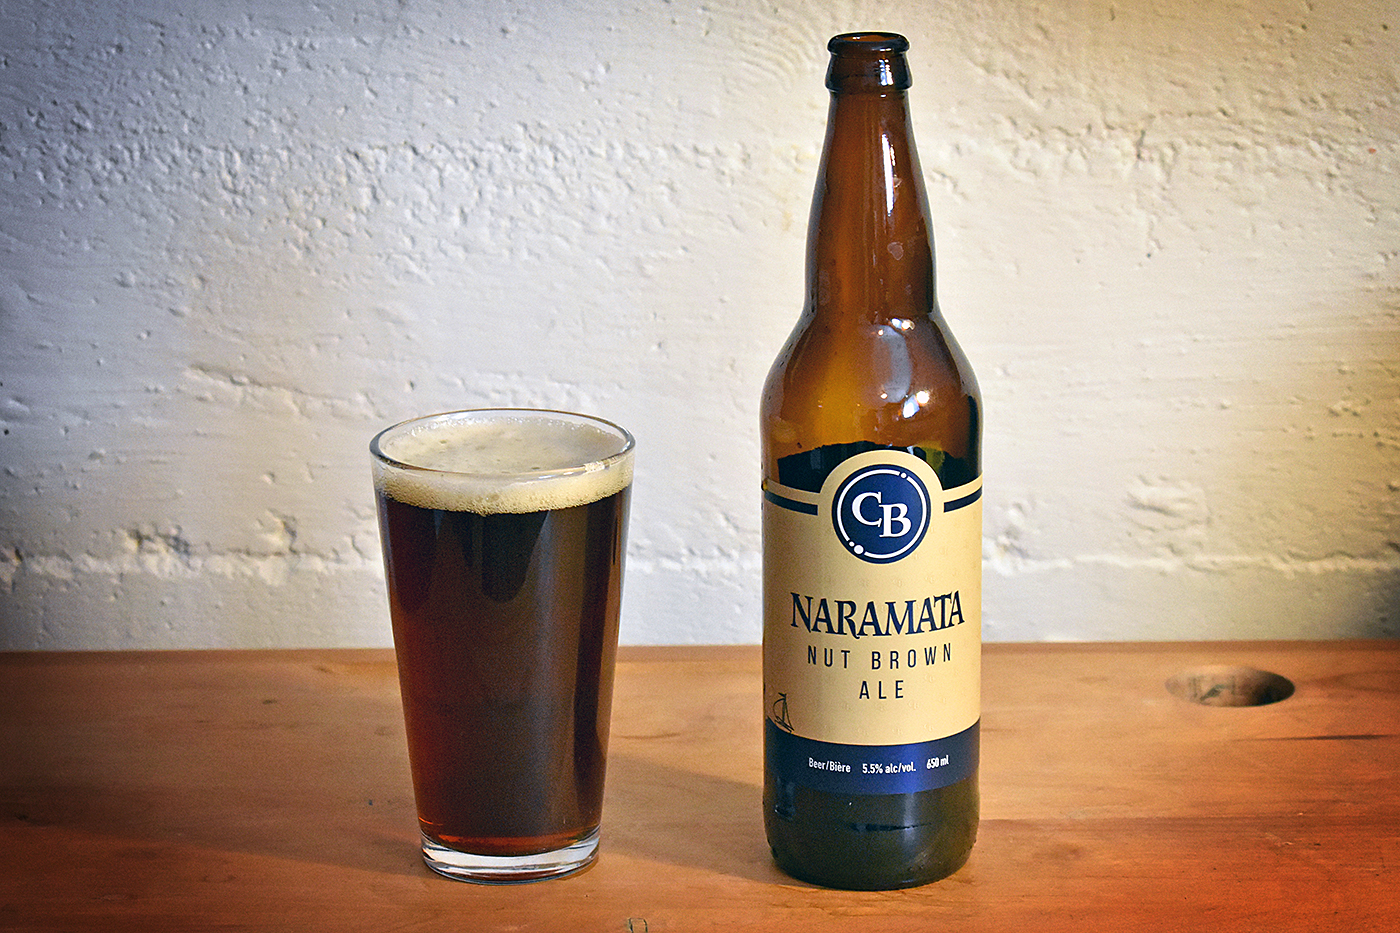 Naramata Nut Brown Ale by Cannery Brewing